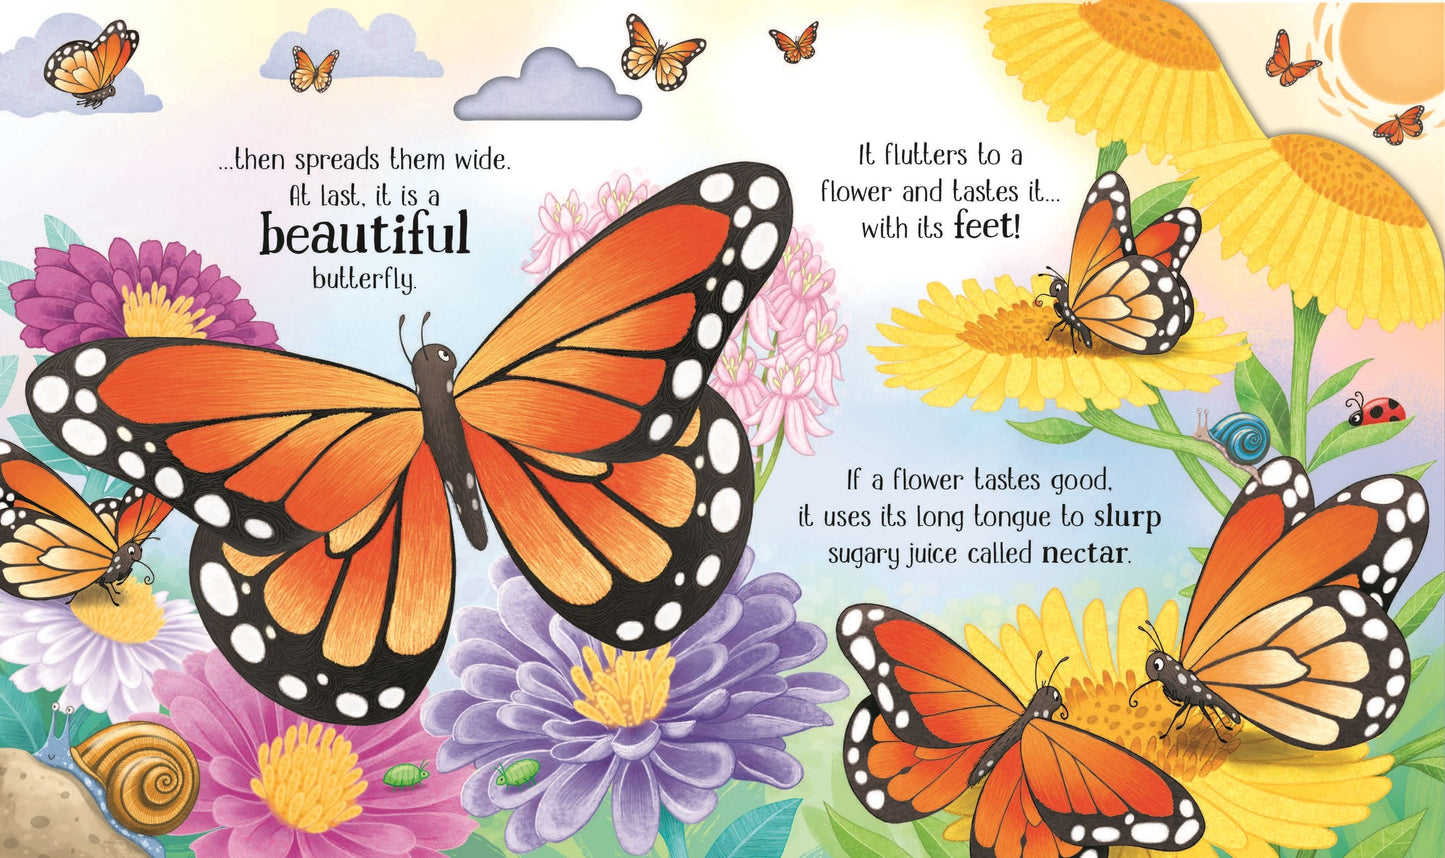 One Little Butterfly - The Life Cycle of a Monarch Butterfly